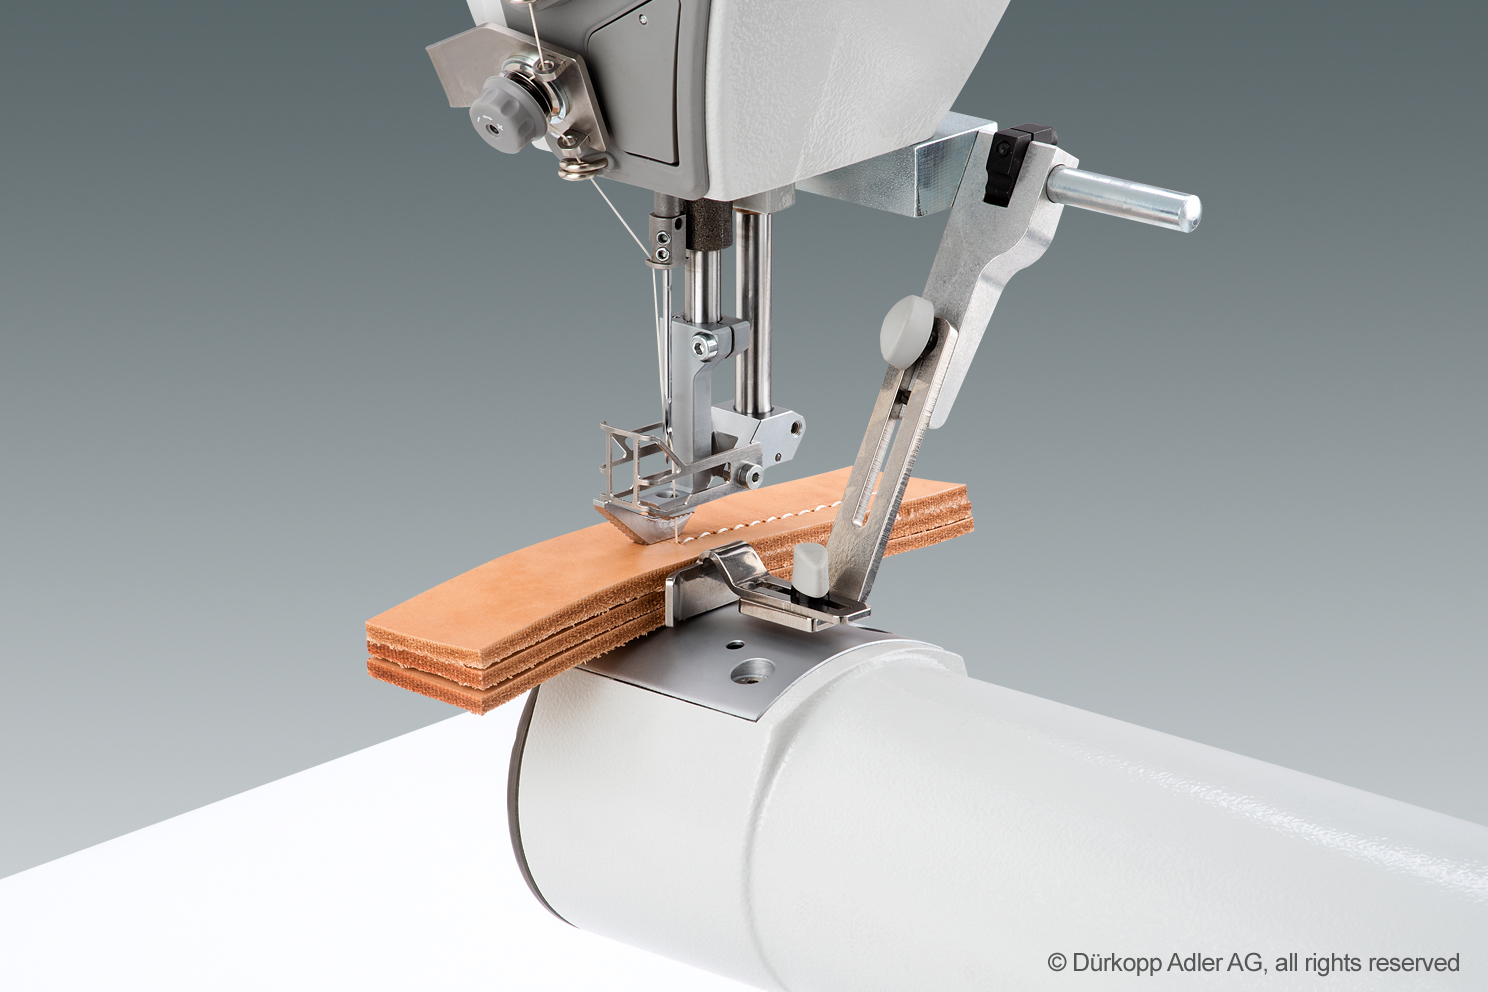 The extremely high sewing foot lift up to 30 mm facilitates the feeding and removing of bulky workpieces